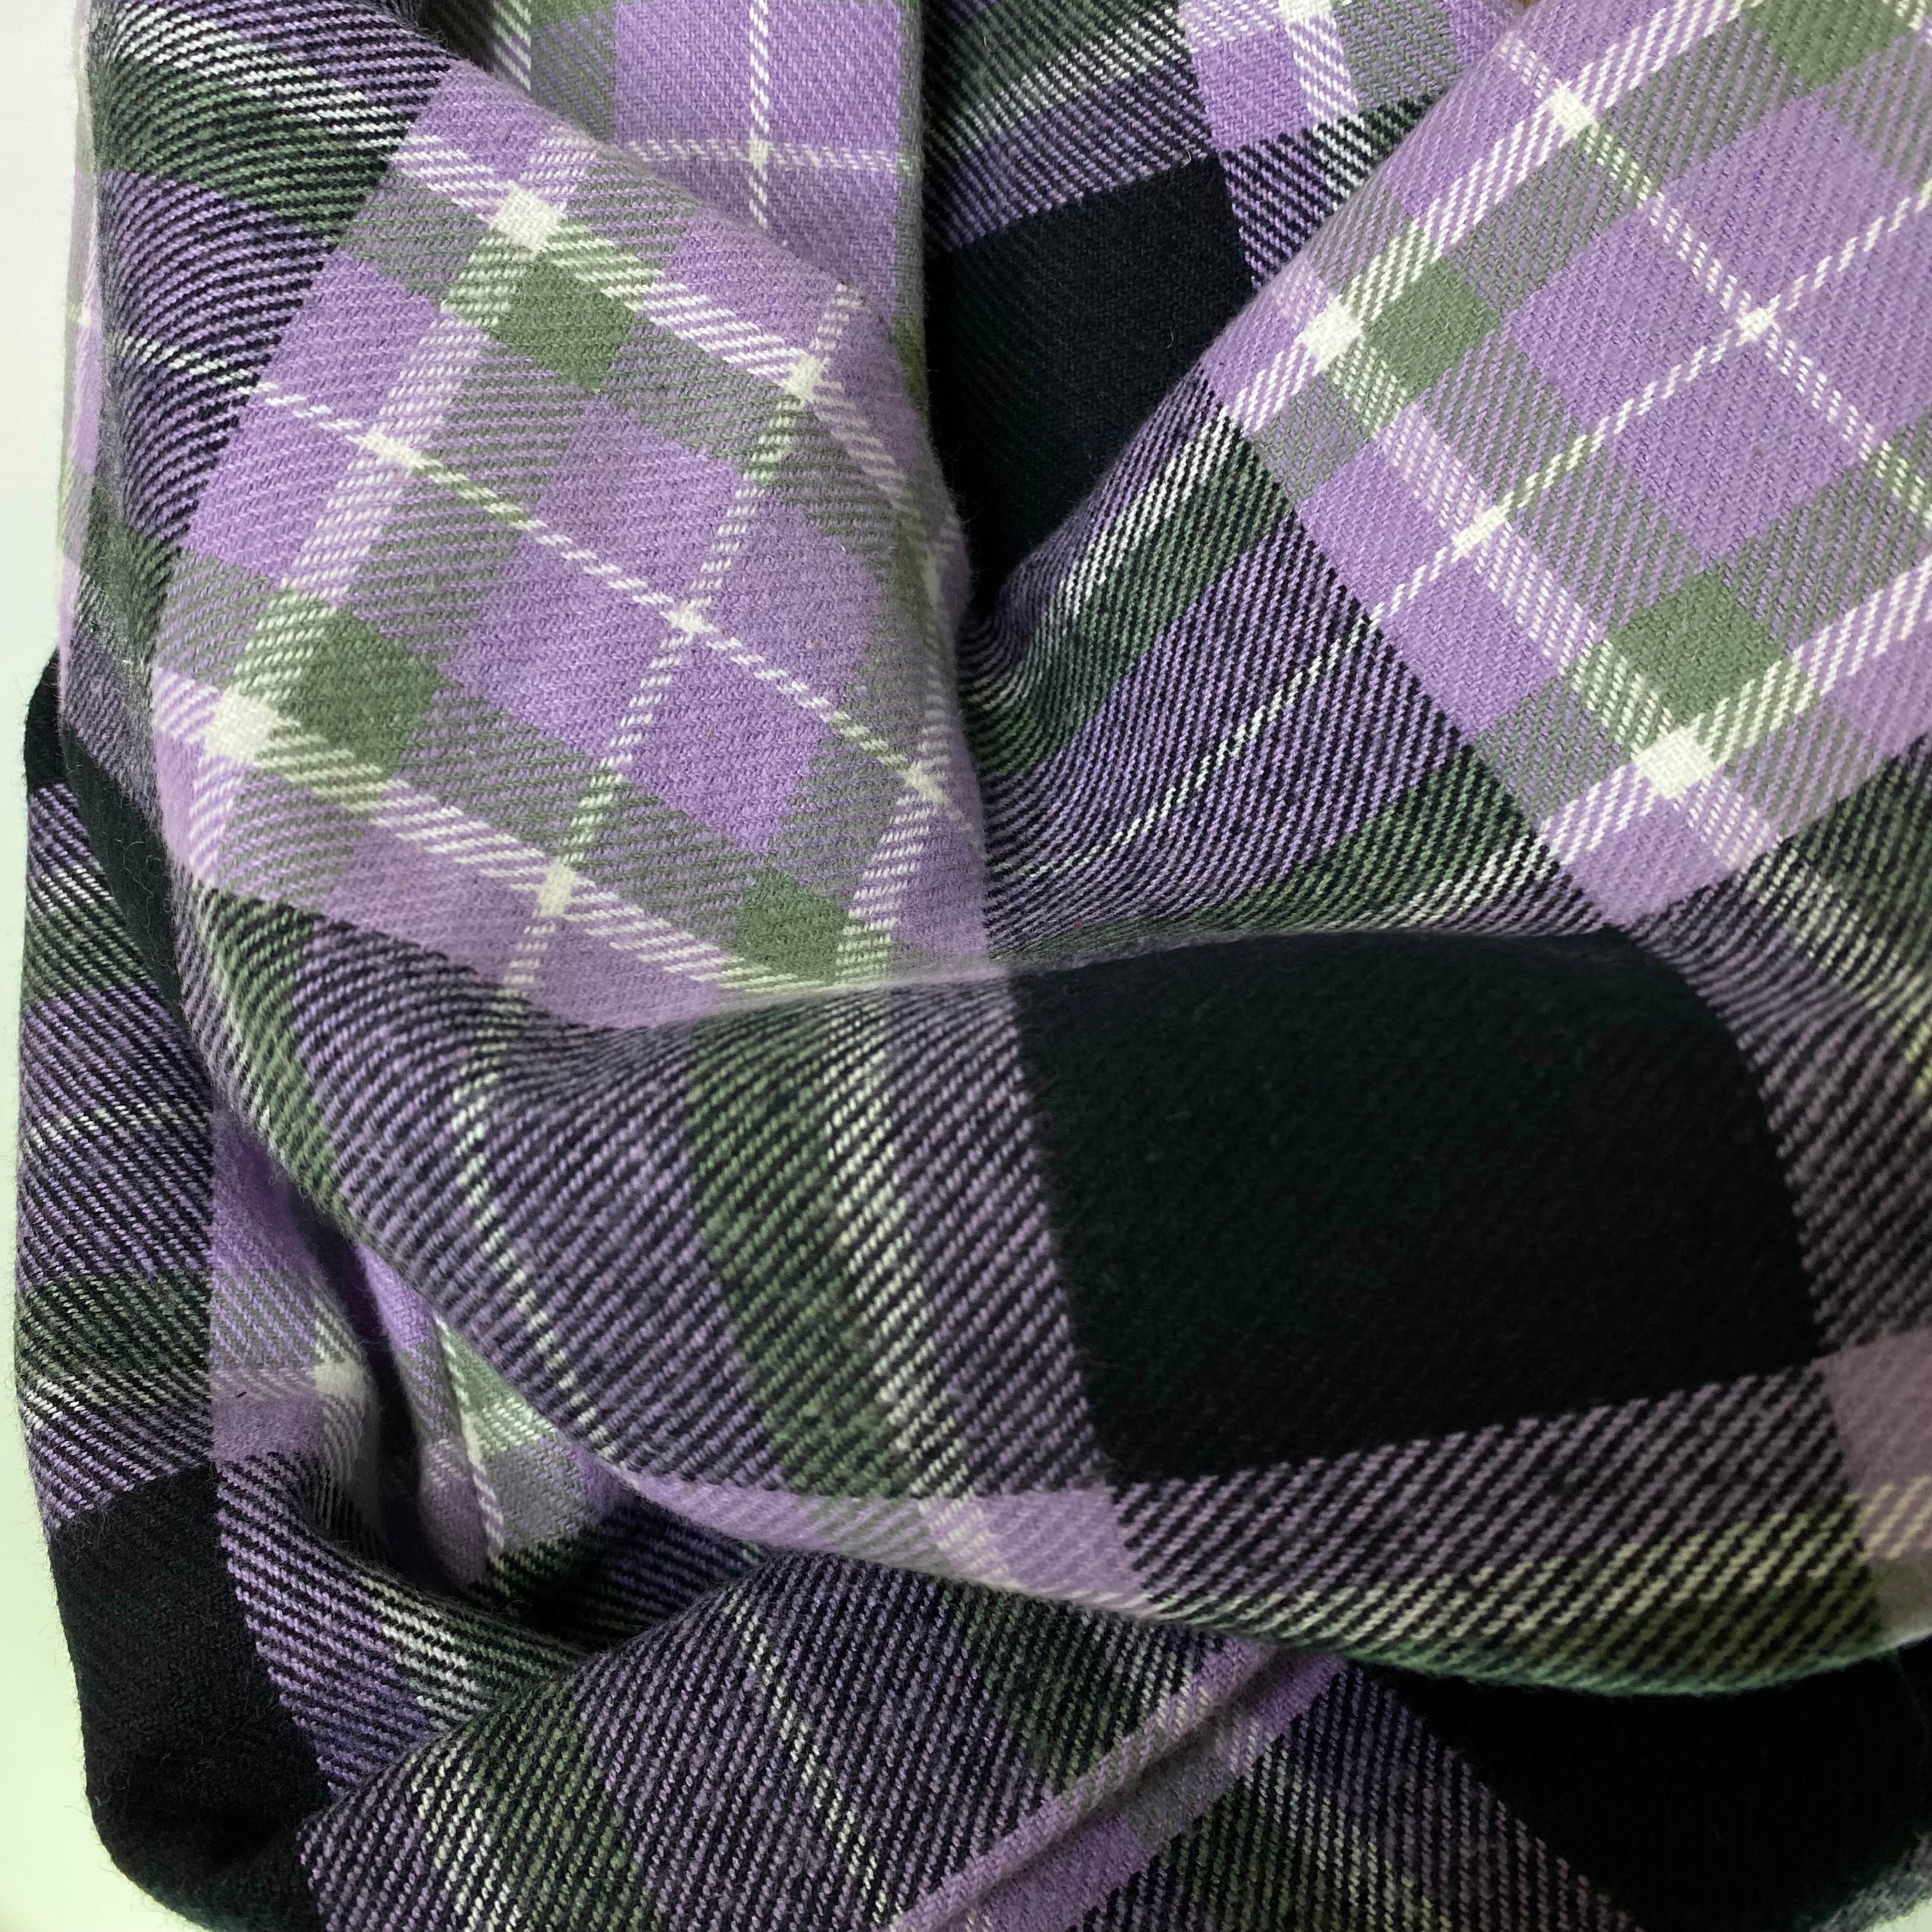 Lavender, Black, Sage Grey, and White Plaid Infinity and Blanket Scarves